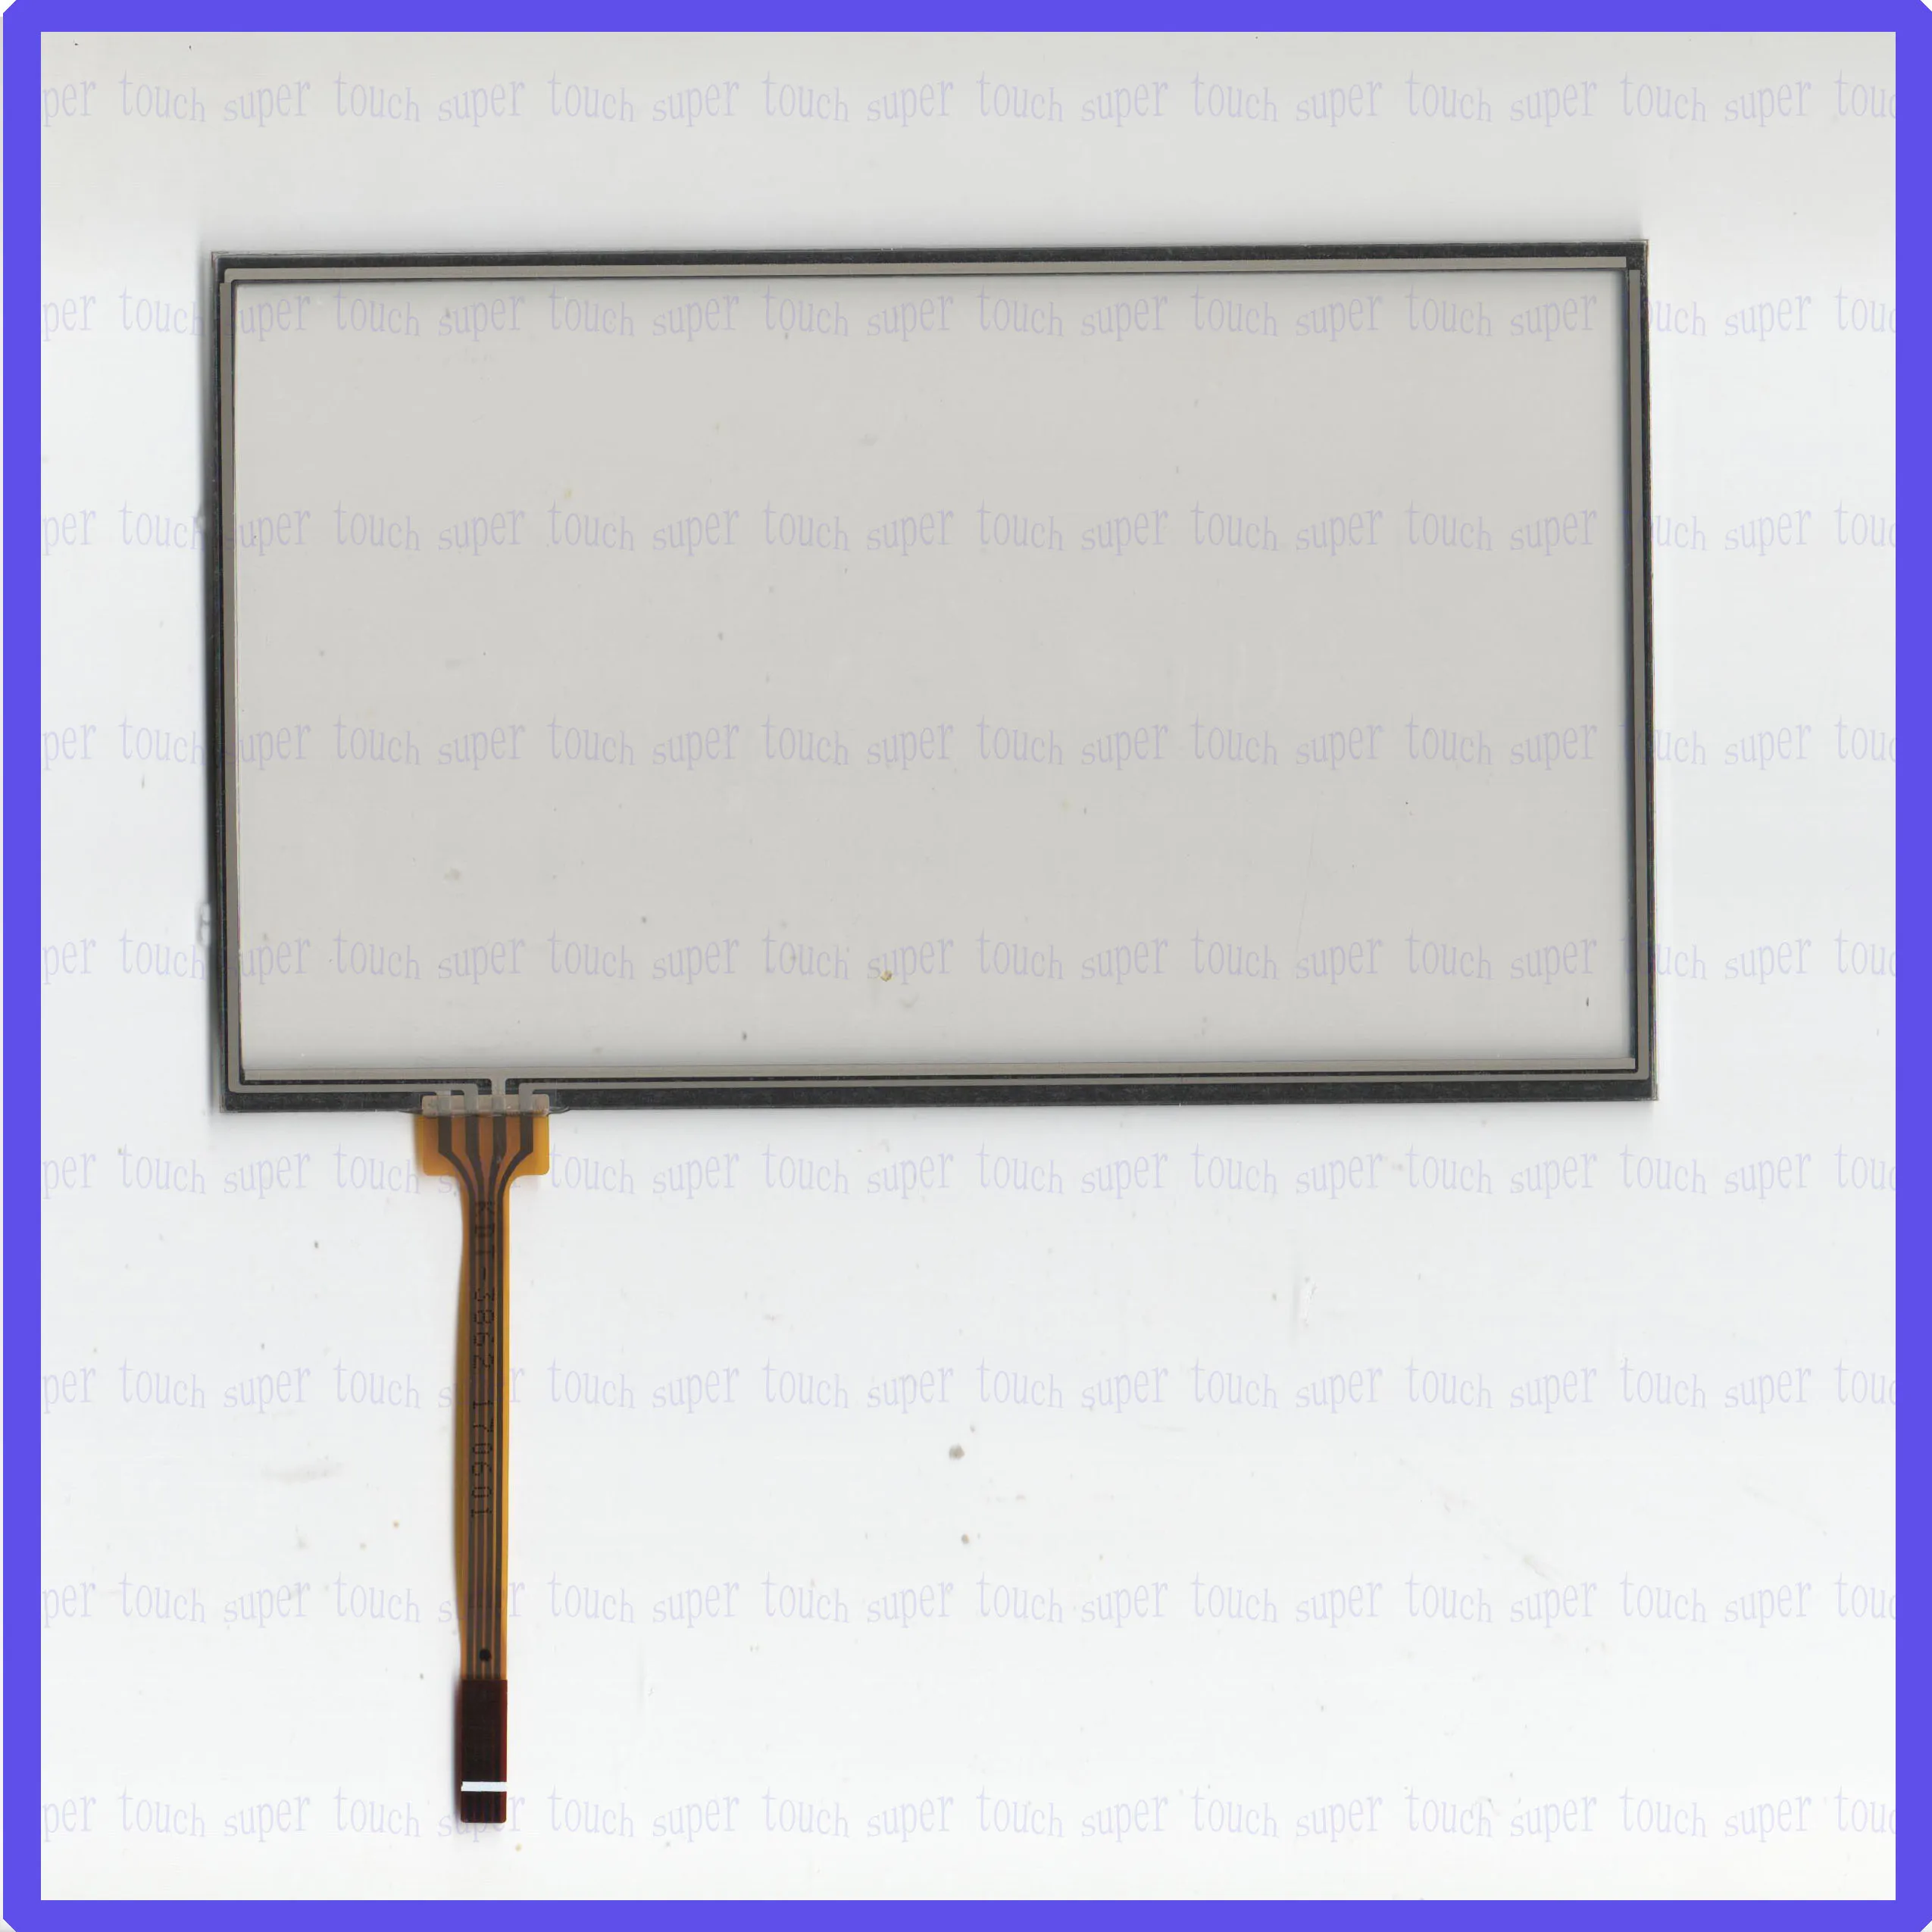 

wholesale for MMC 2190 LADA Granta this is compatible 7inch 4lines resistance screen Industrial use for car rideo